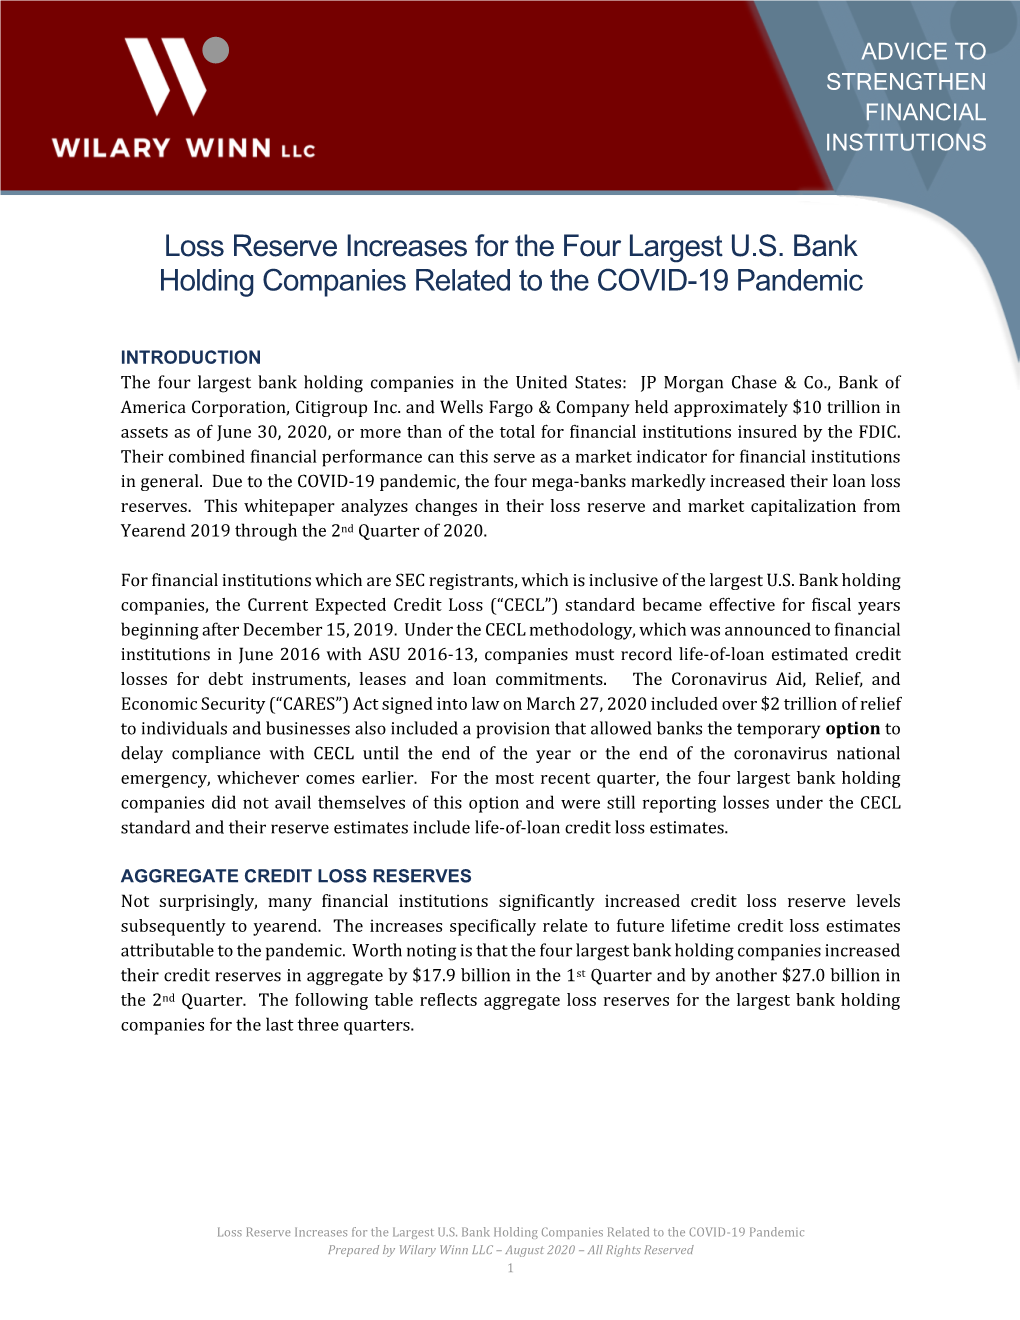 Loss Reserve Increases for the Four Largest U.S. Bank Holding Companies Related to the COVID-19 Pandemic